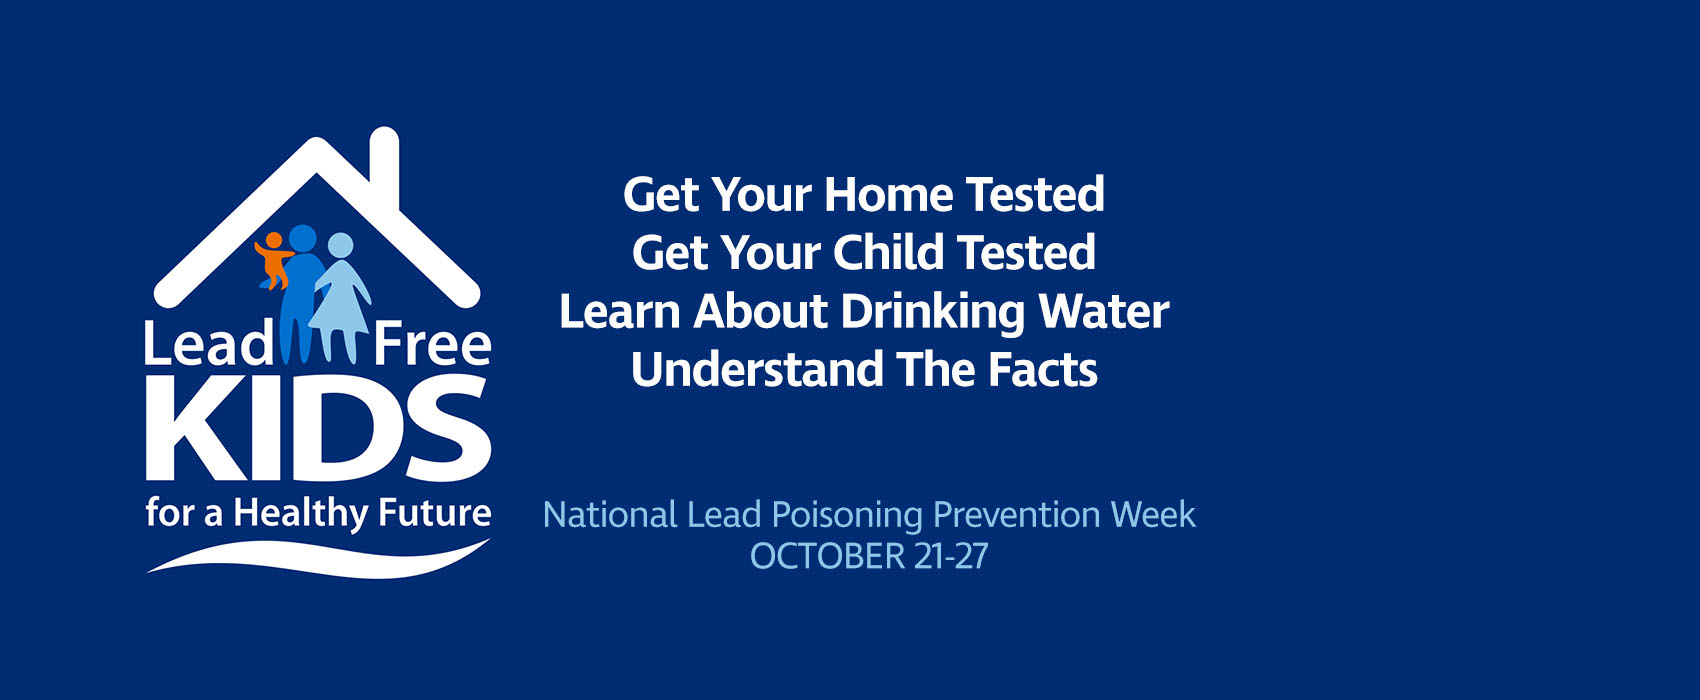 National Lead Poisoning Prevention Week District Health Department 10 